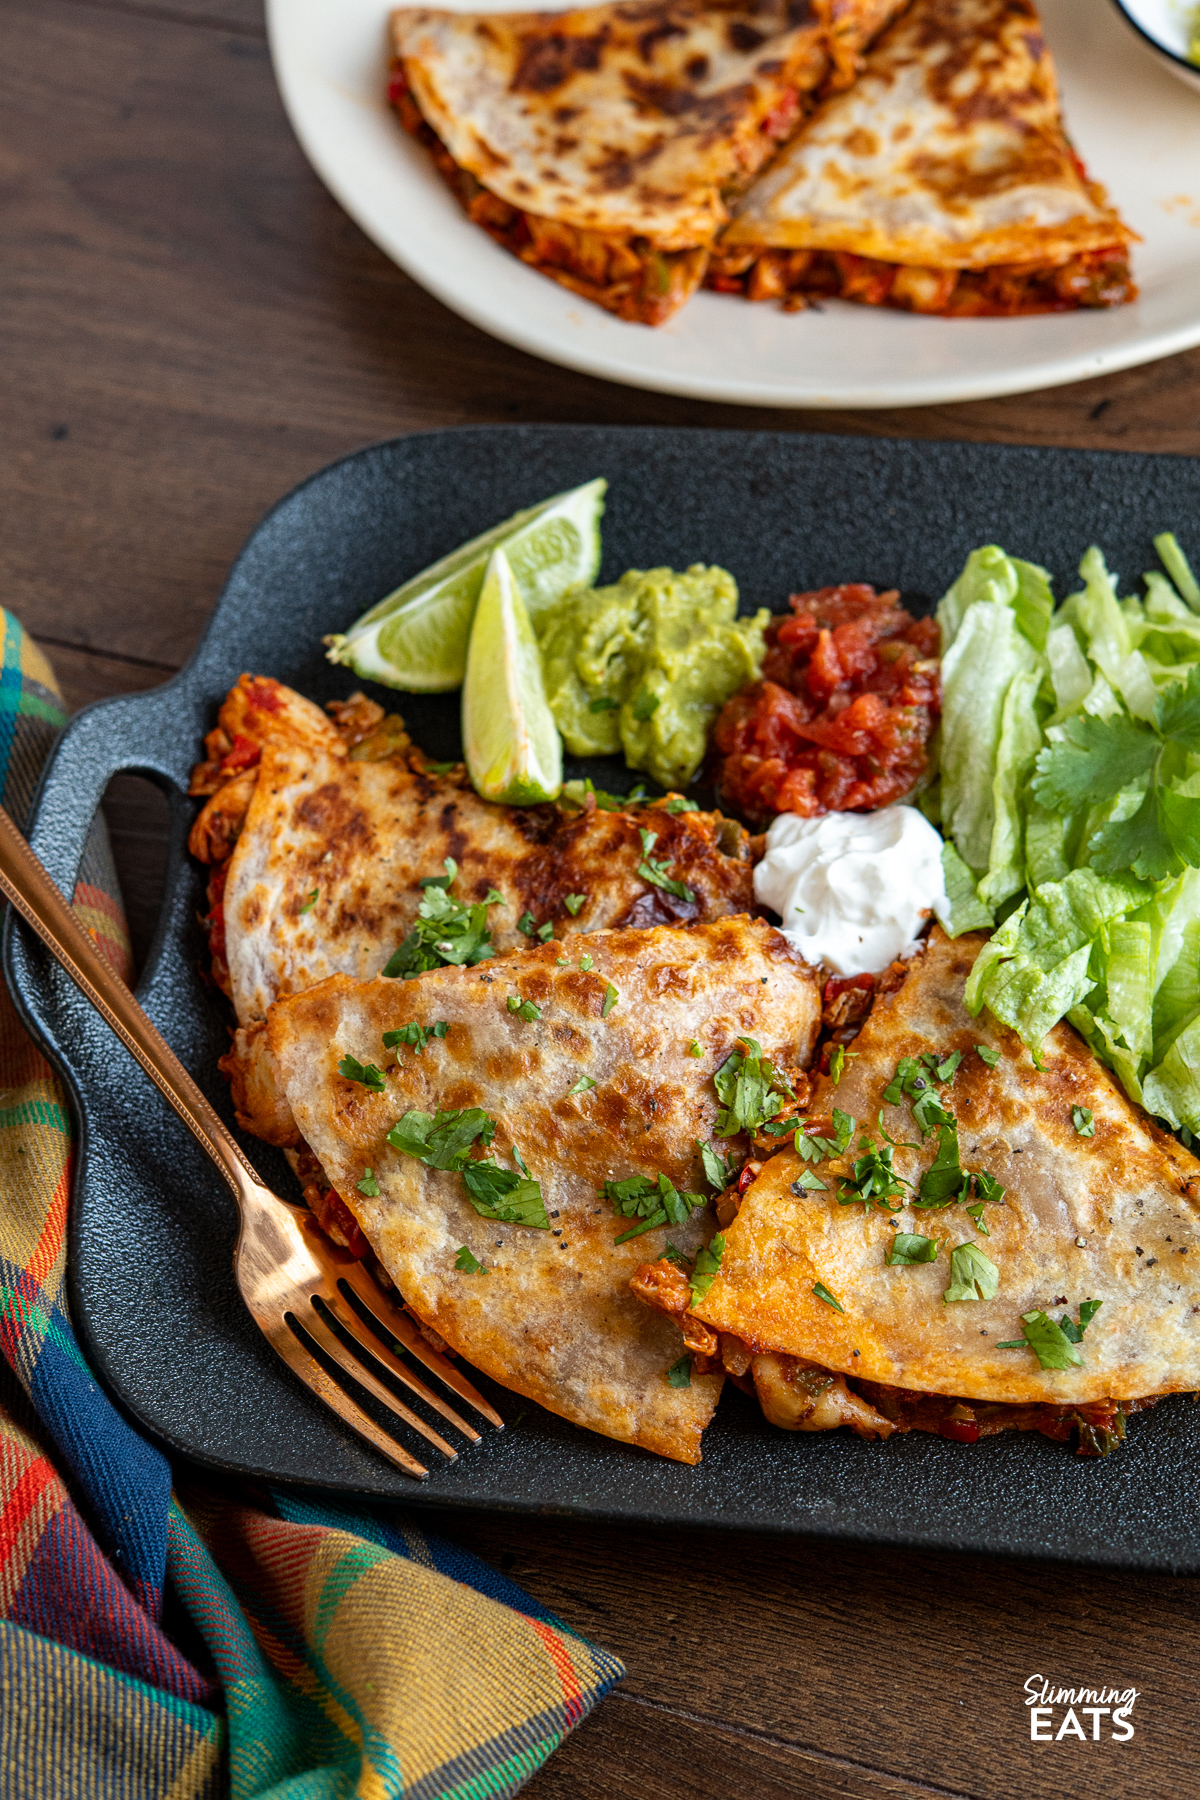 A serving of chicken quesadilla on a black plate, accompanied by lettuce, guacamole, salsa, and soured cream, decorated with scattered coriander and lime wedges.